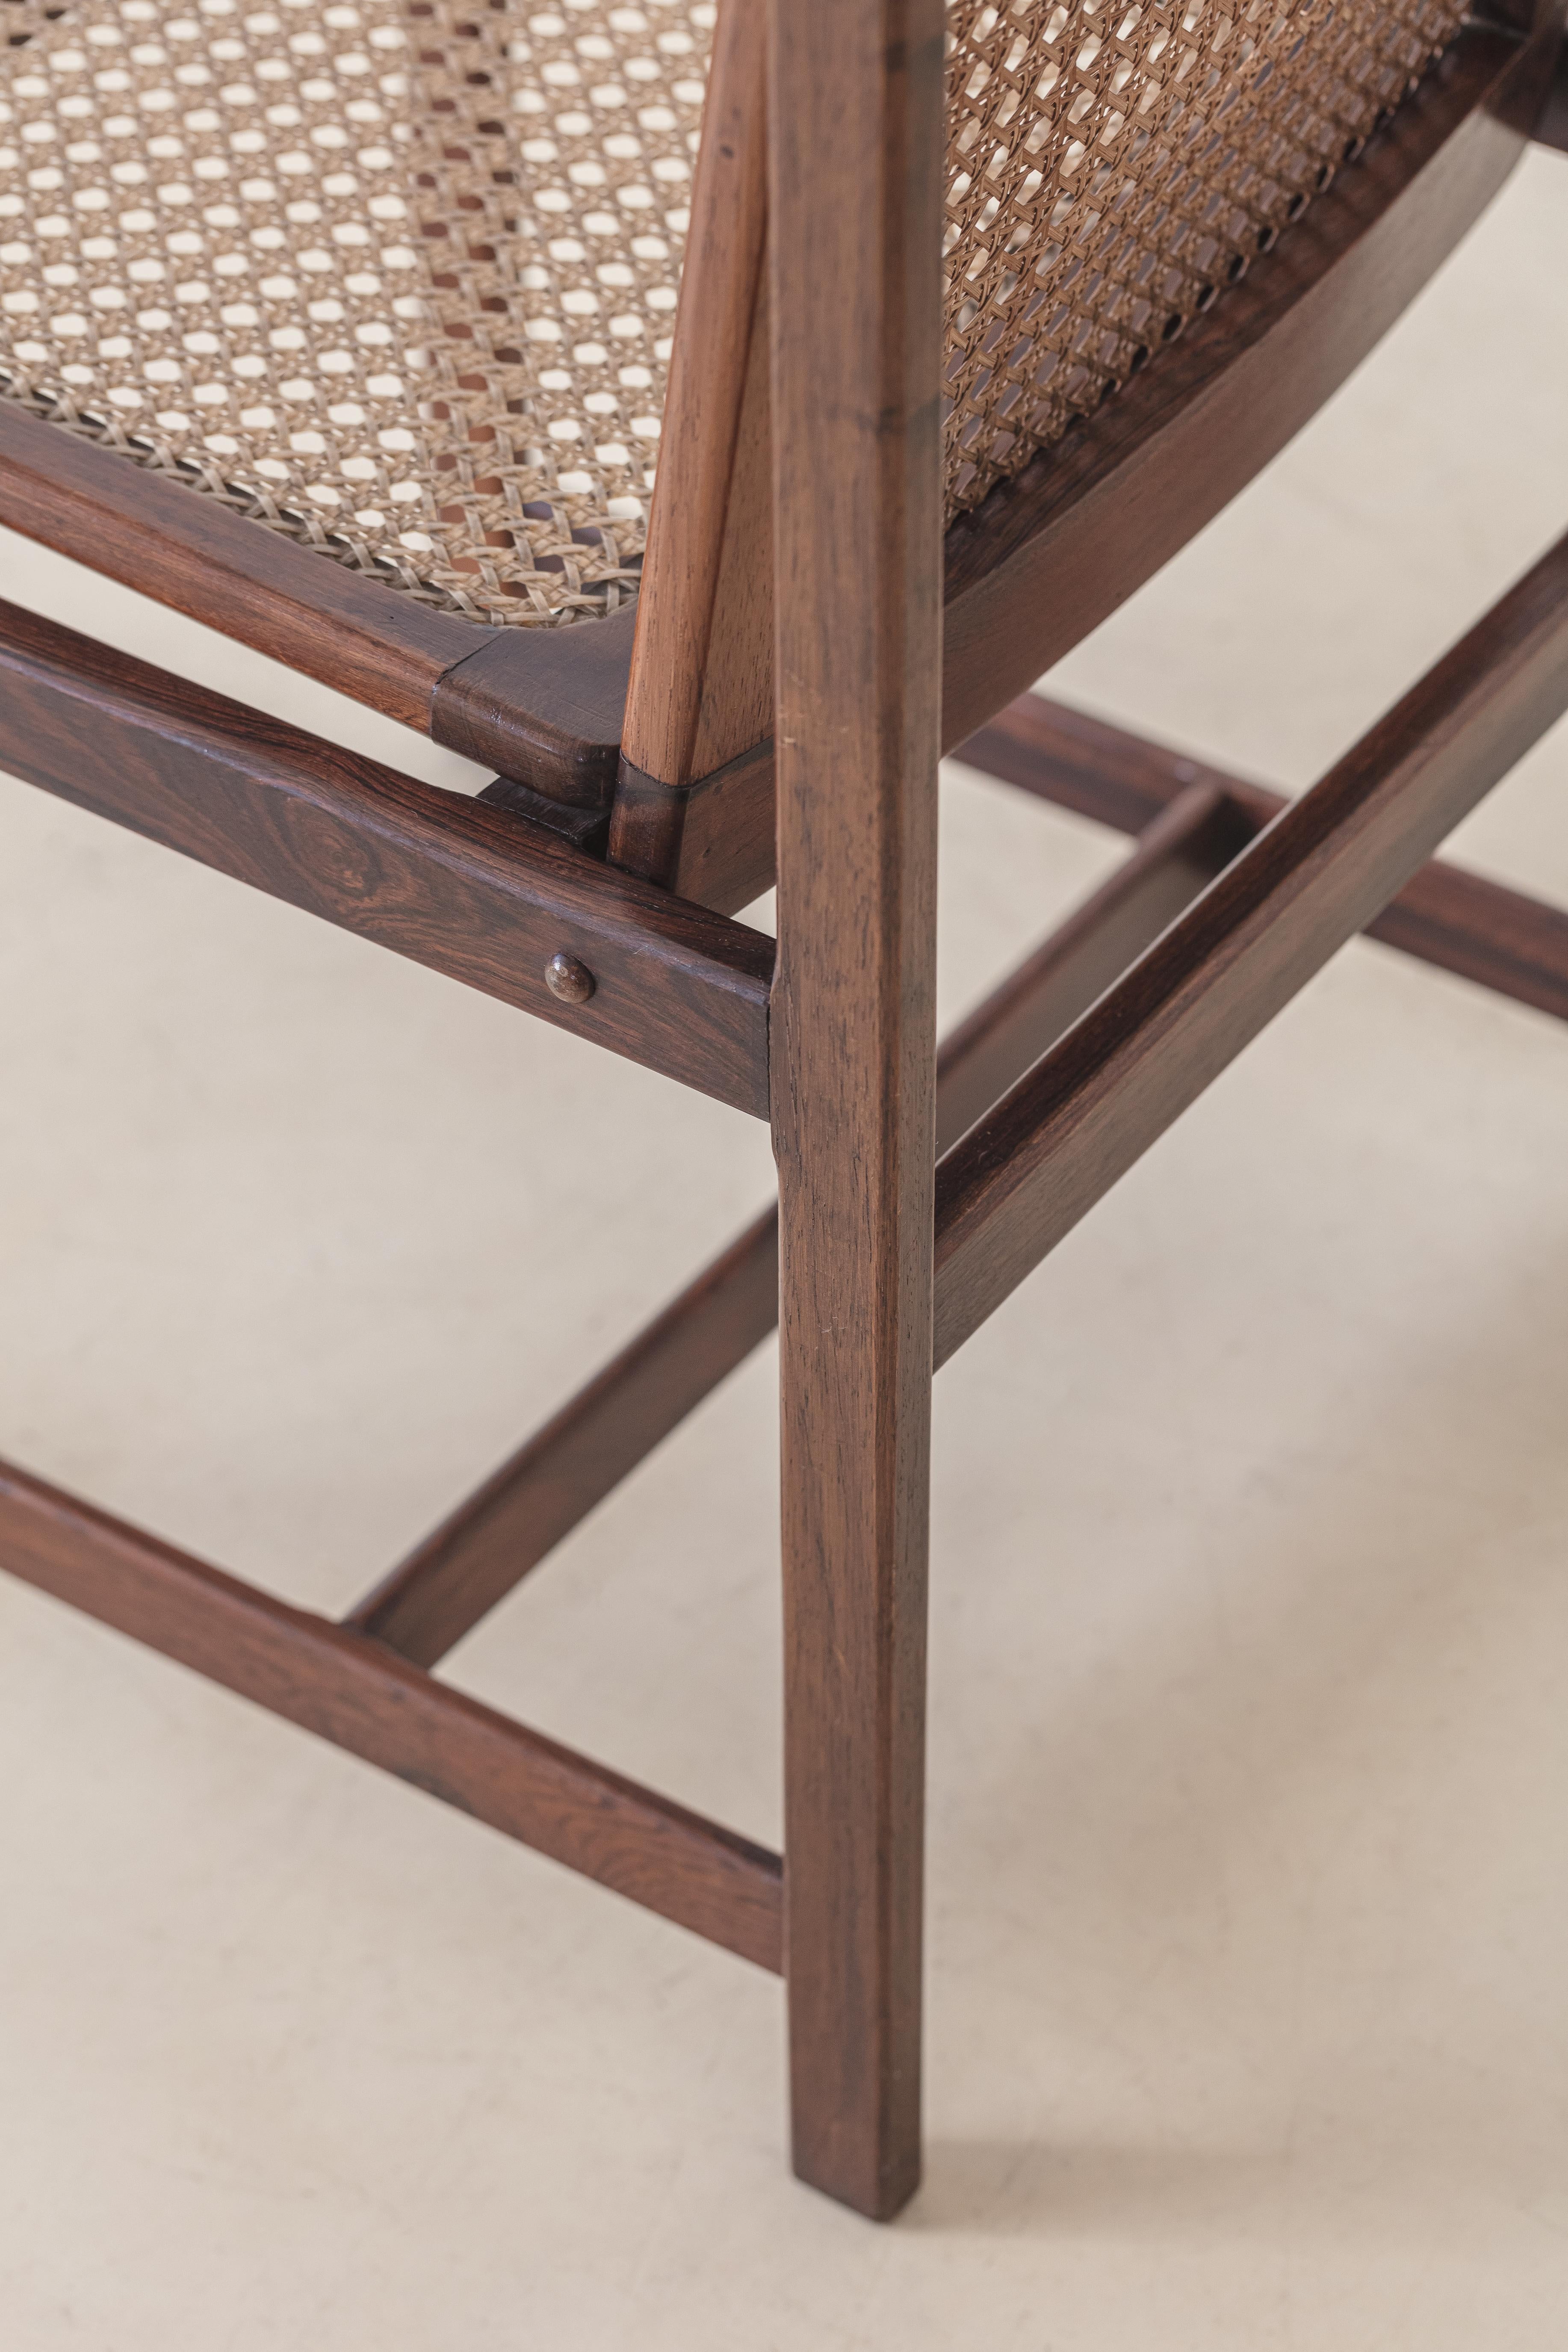 Celina Decorações Set of Six Dining Chairs, Rosewood and Cane, Midcentury 1960s For Sale 7